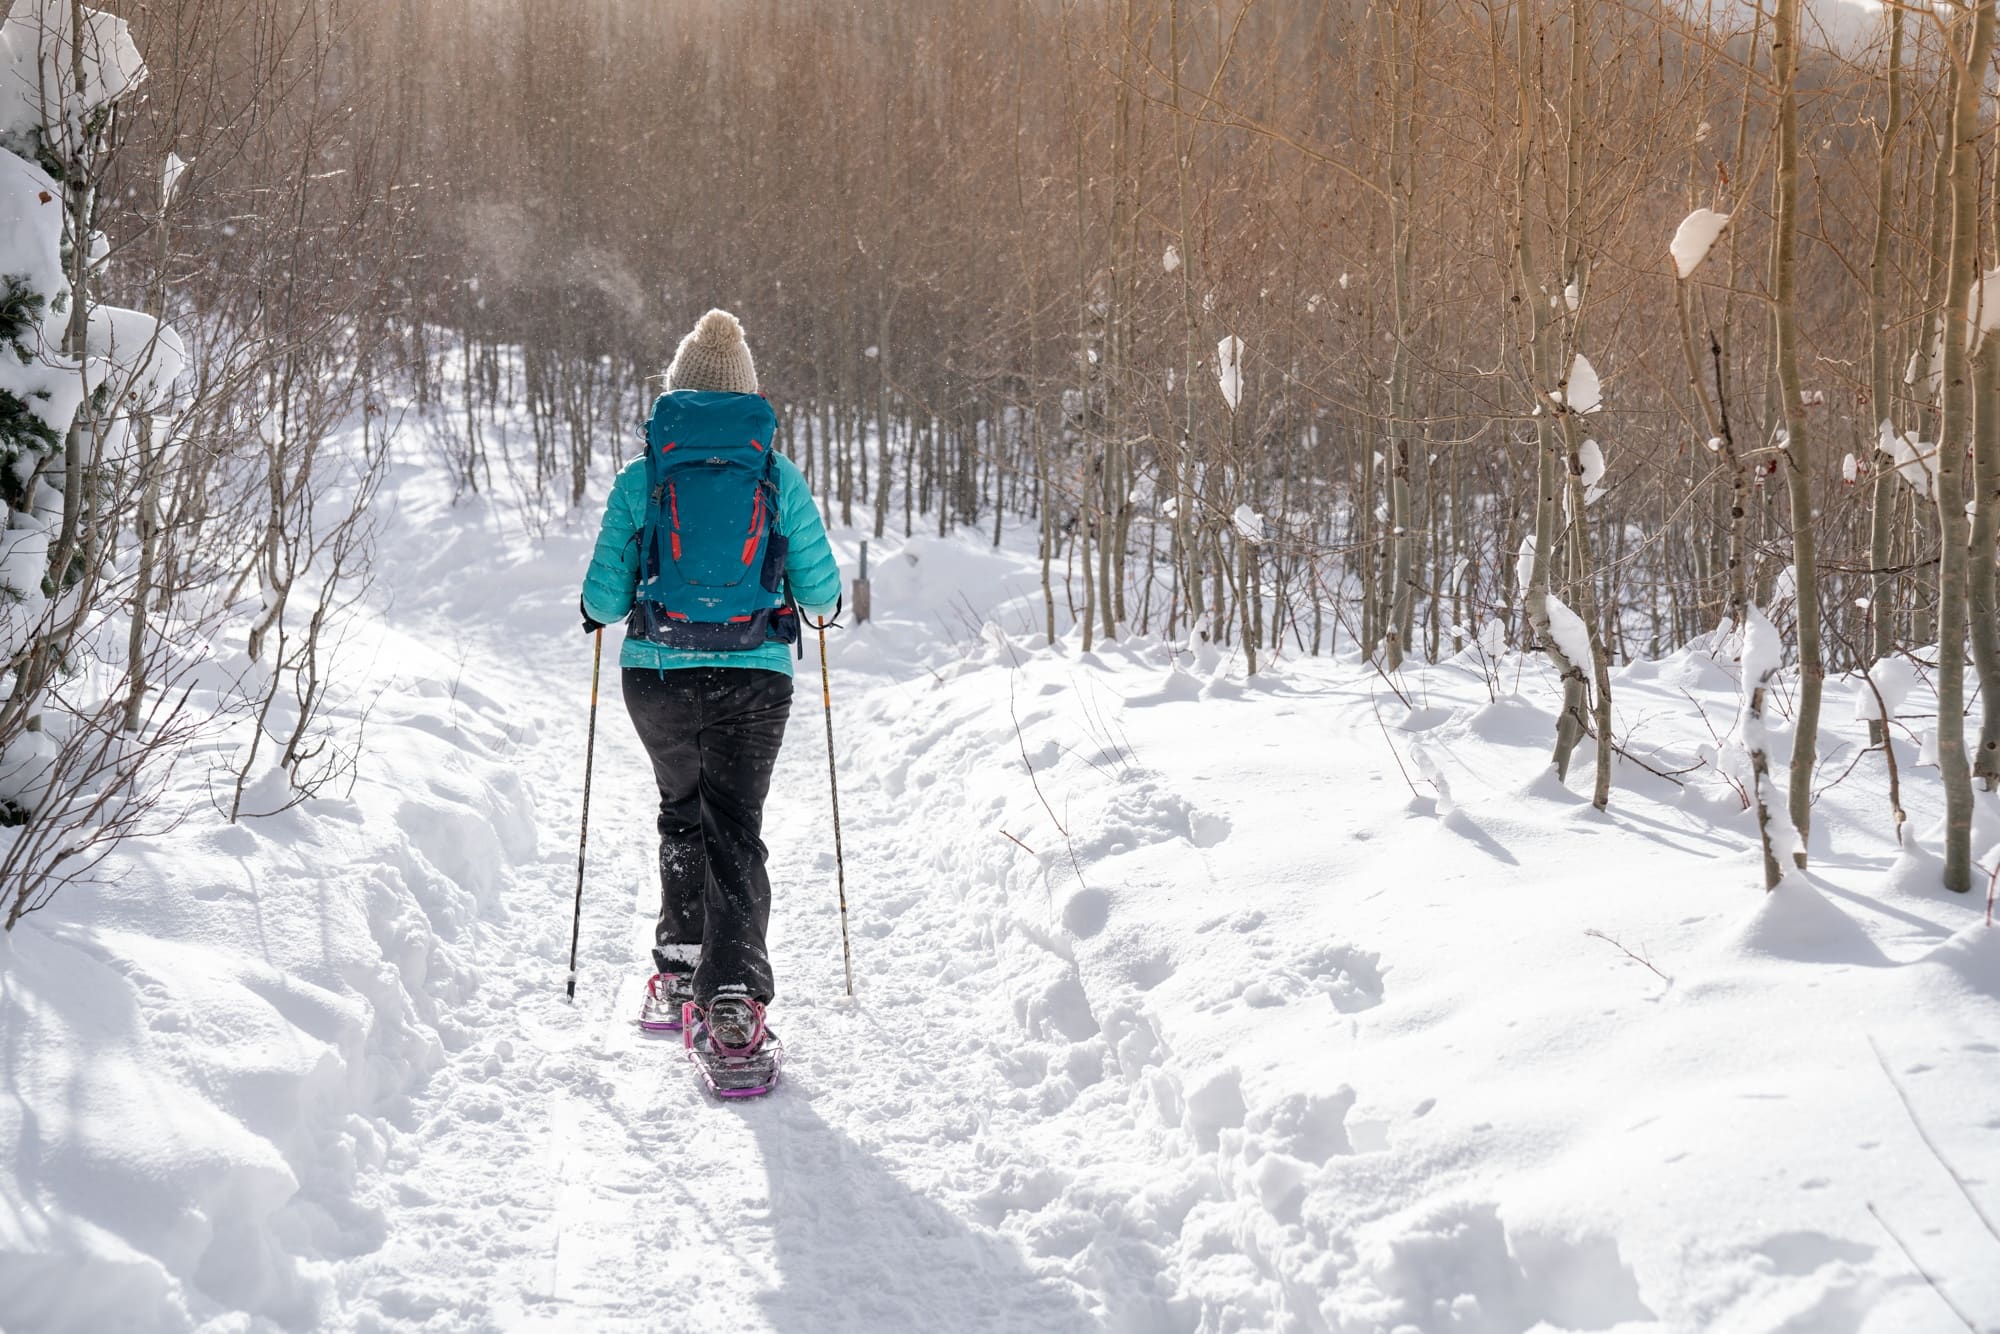 Learn how to snowshoe with our snowshoeing 101 guide. Get tips on how to find trails, what to wear, gear, important safety tips, and more.